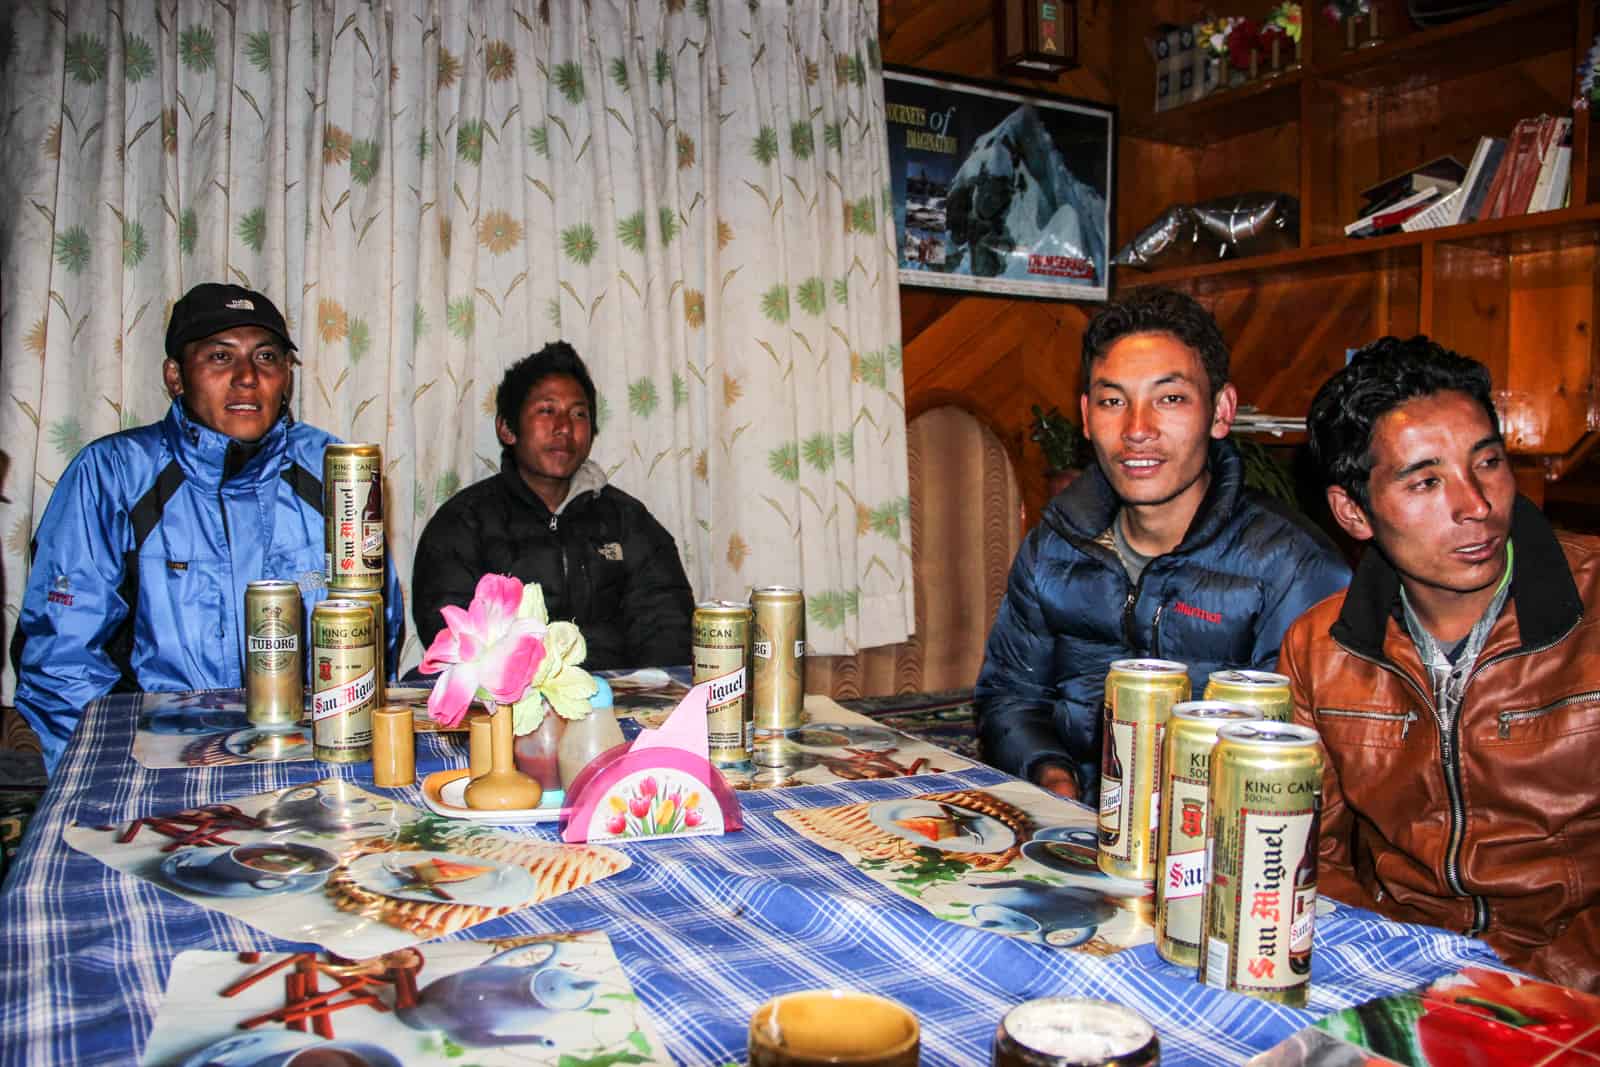 Four sherpas on the Everest Base Camp trek enjoy post-trek beers on a blue and white checkered table in a wooden mountain hut